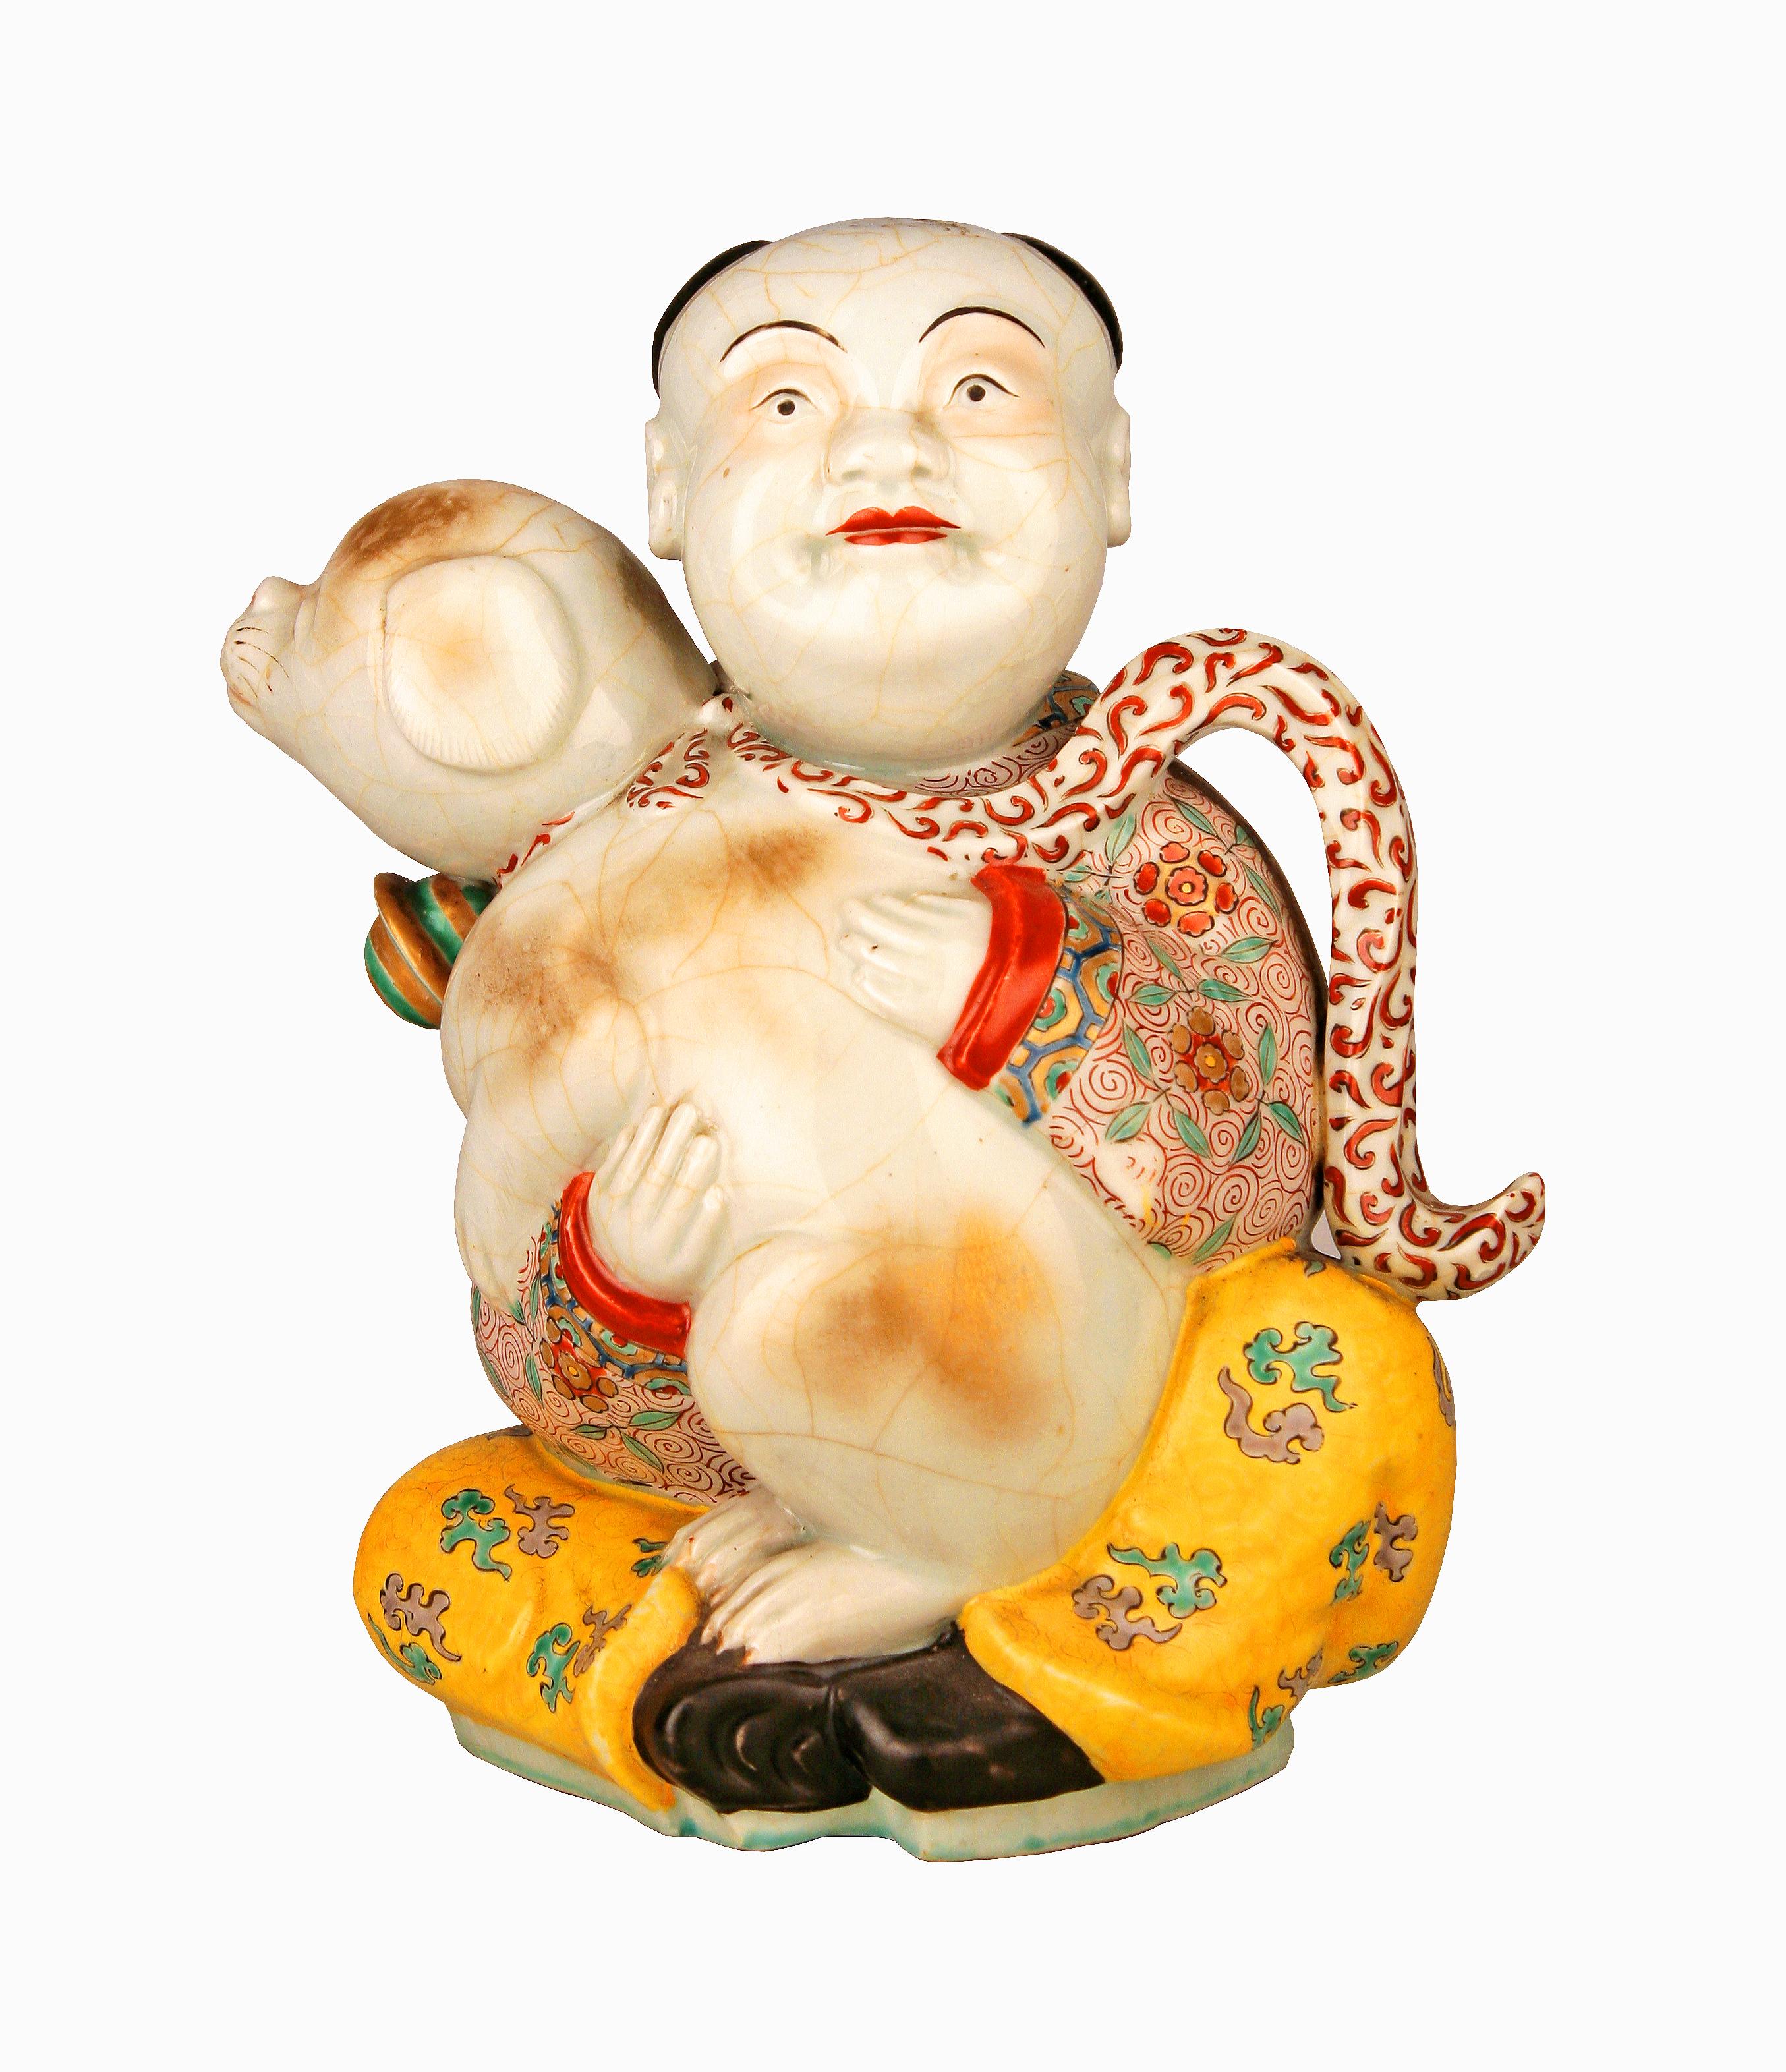 19th Century/Qing Dinasty hand-painted glazed porcelain sitting man with scarf and dog figurine

By: unknown
Material: ceramic, porcelain, paint
Technique: pressed, molded, painted, hand-painted, hadn-crafted, glazed
Dimensions: 7 in x 8 in x 10